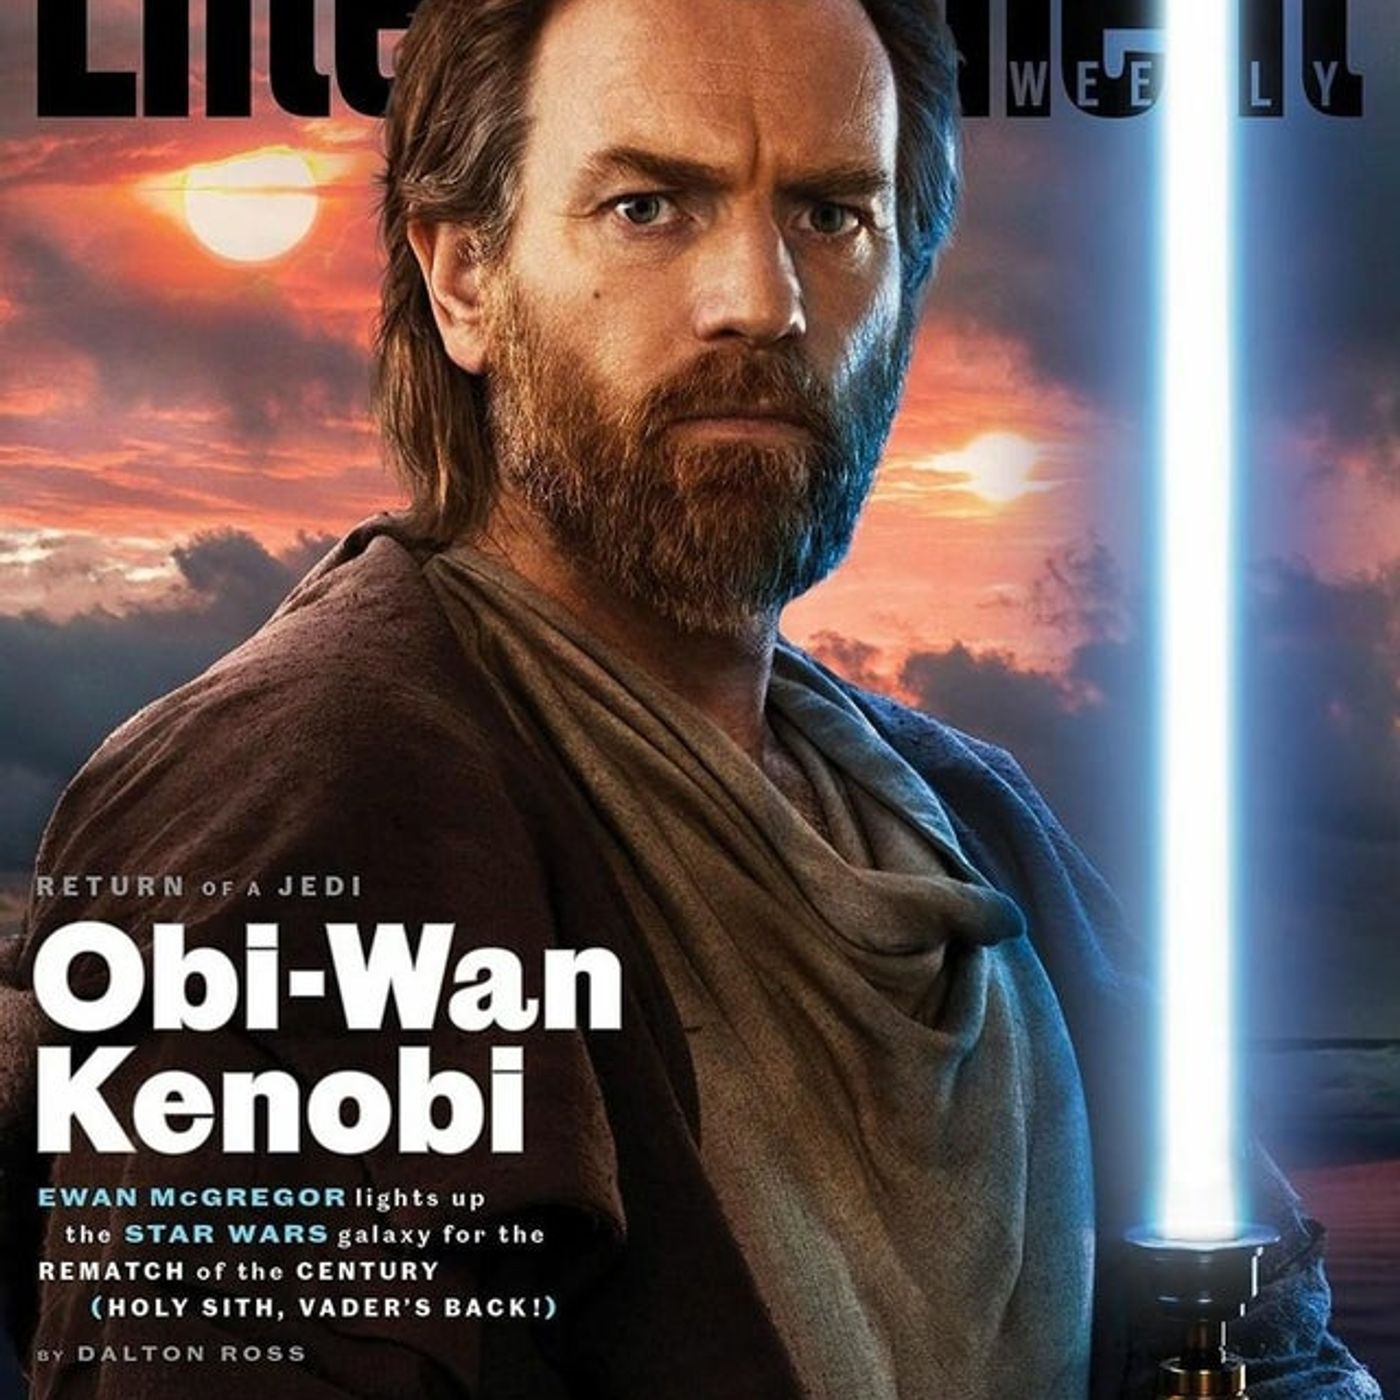 A Star Wars Show: Maul and Kenobi Series? New movie rumors. Plus, leaks and news!